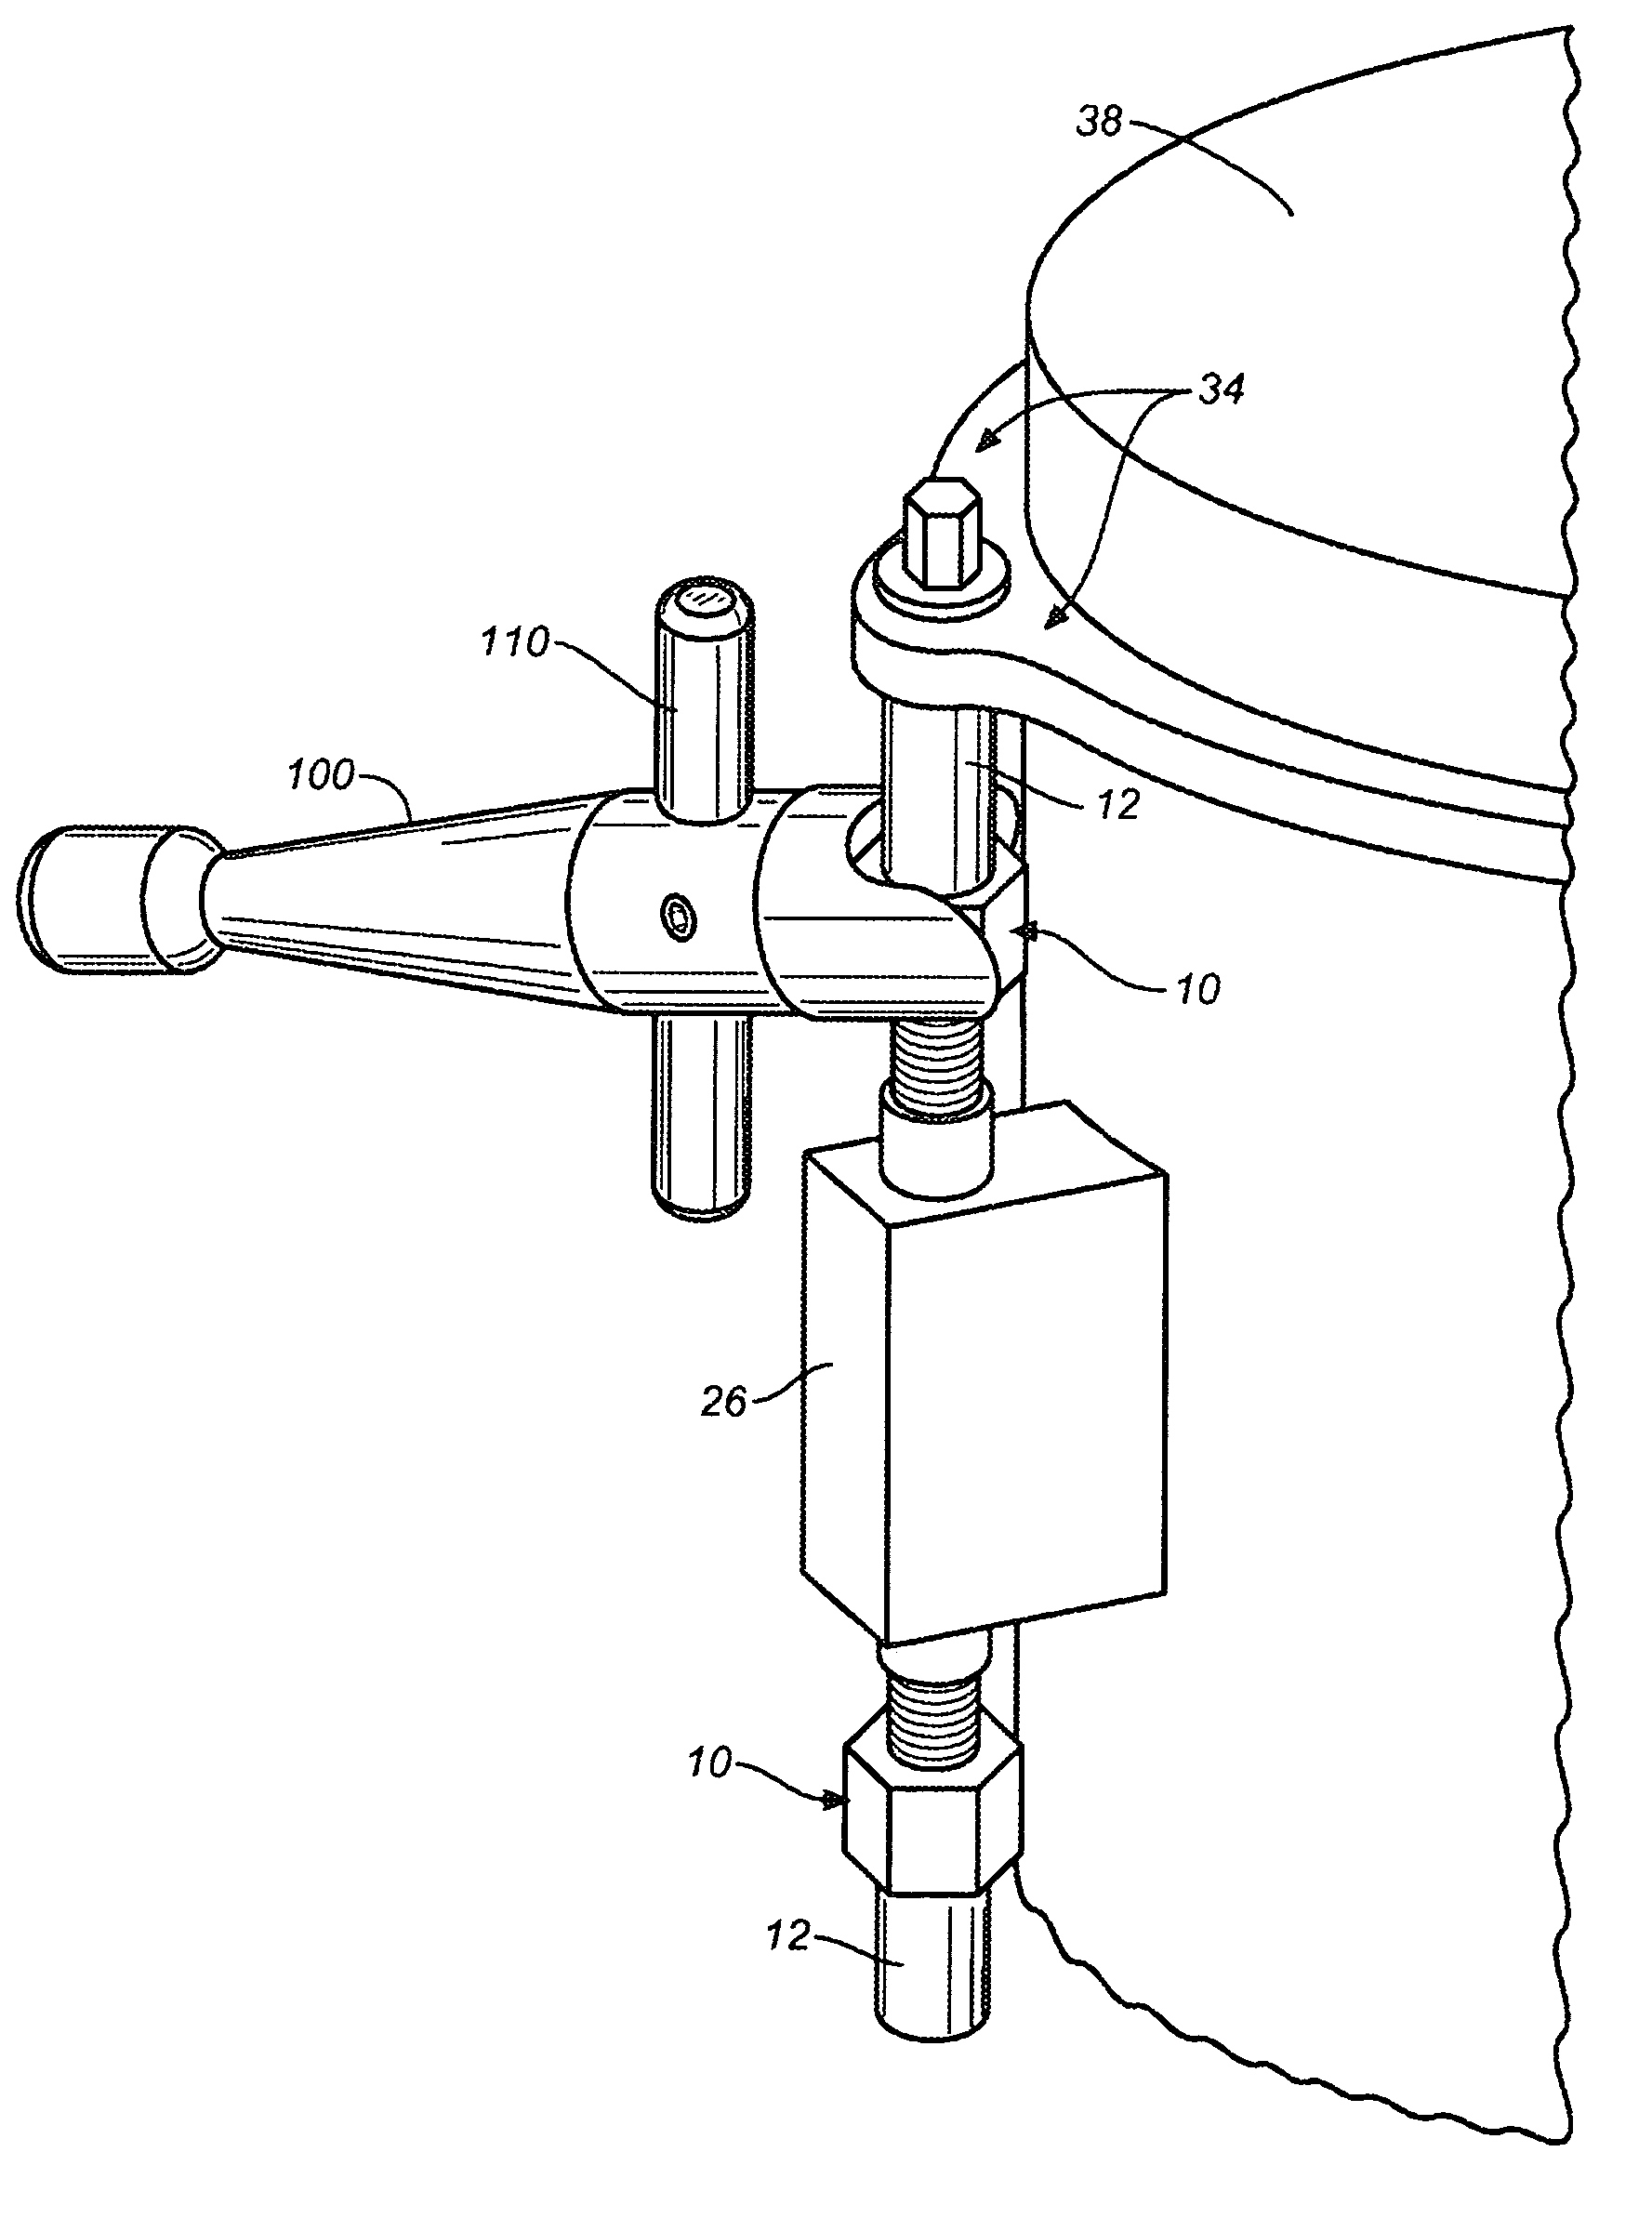 Drum tuning and tuning stabilization mechanism